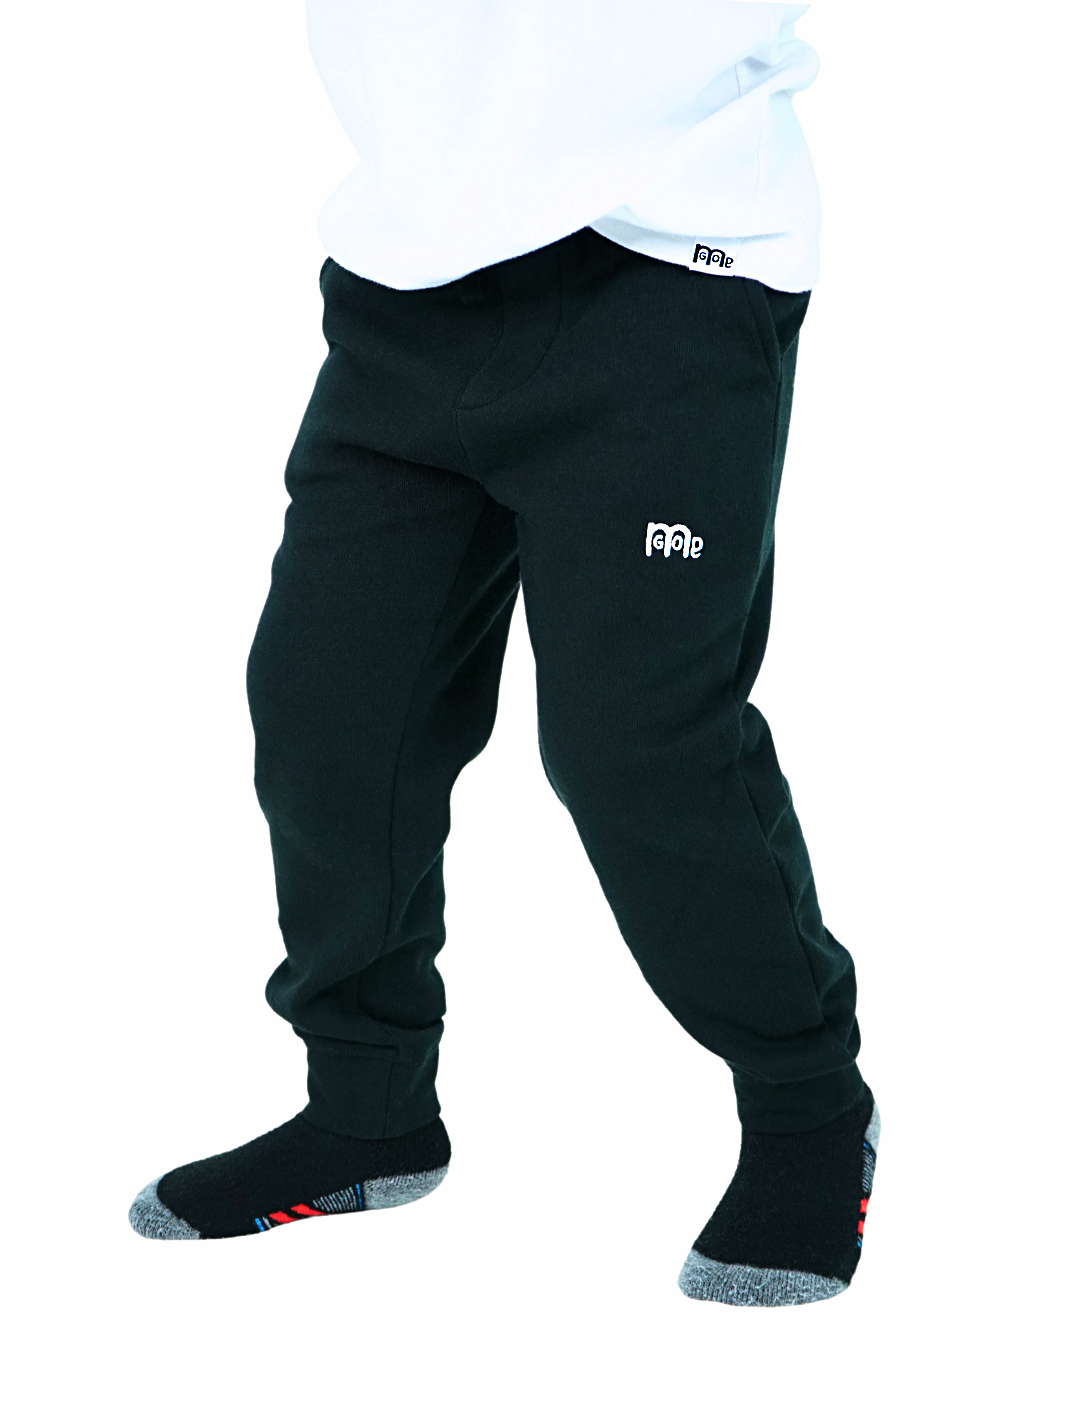 Toddler size Black jogger Sweatpants with elastic waistband, sewn fly detail, jersey-lined front pockets, stylish back pocket, and White GODinme logo.